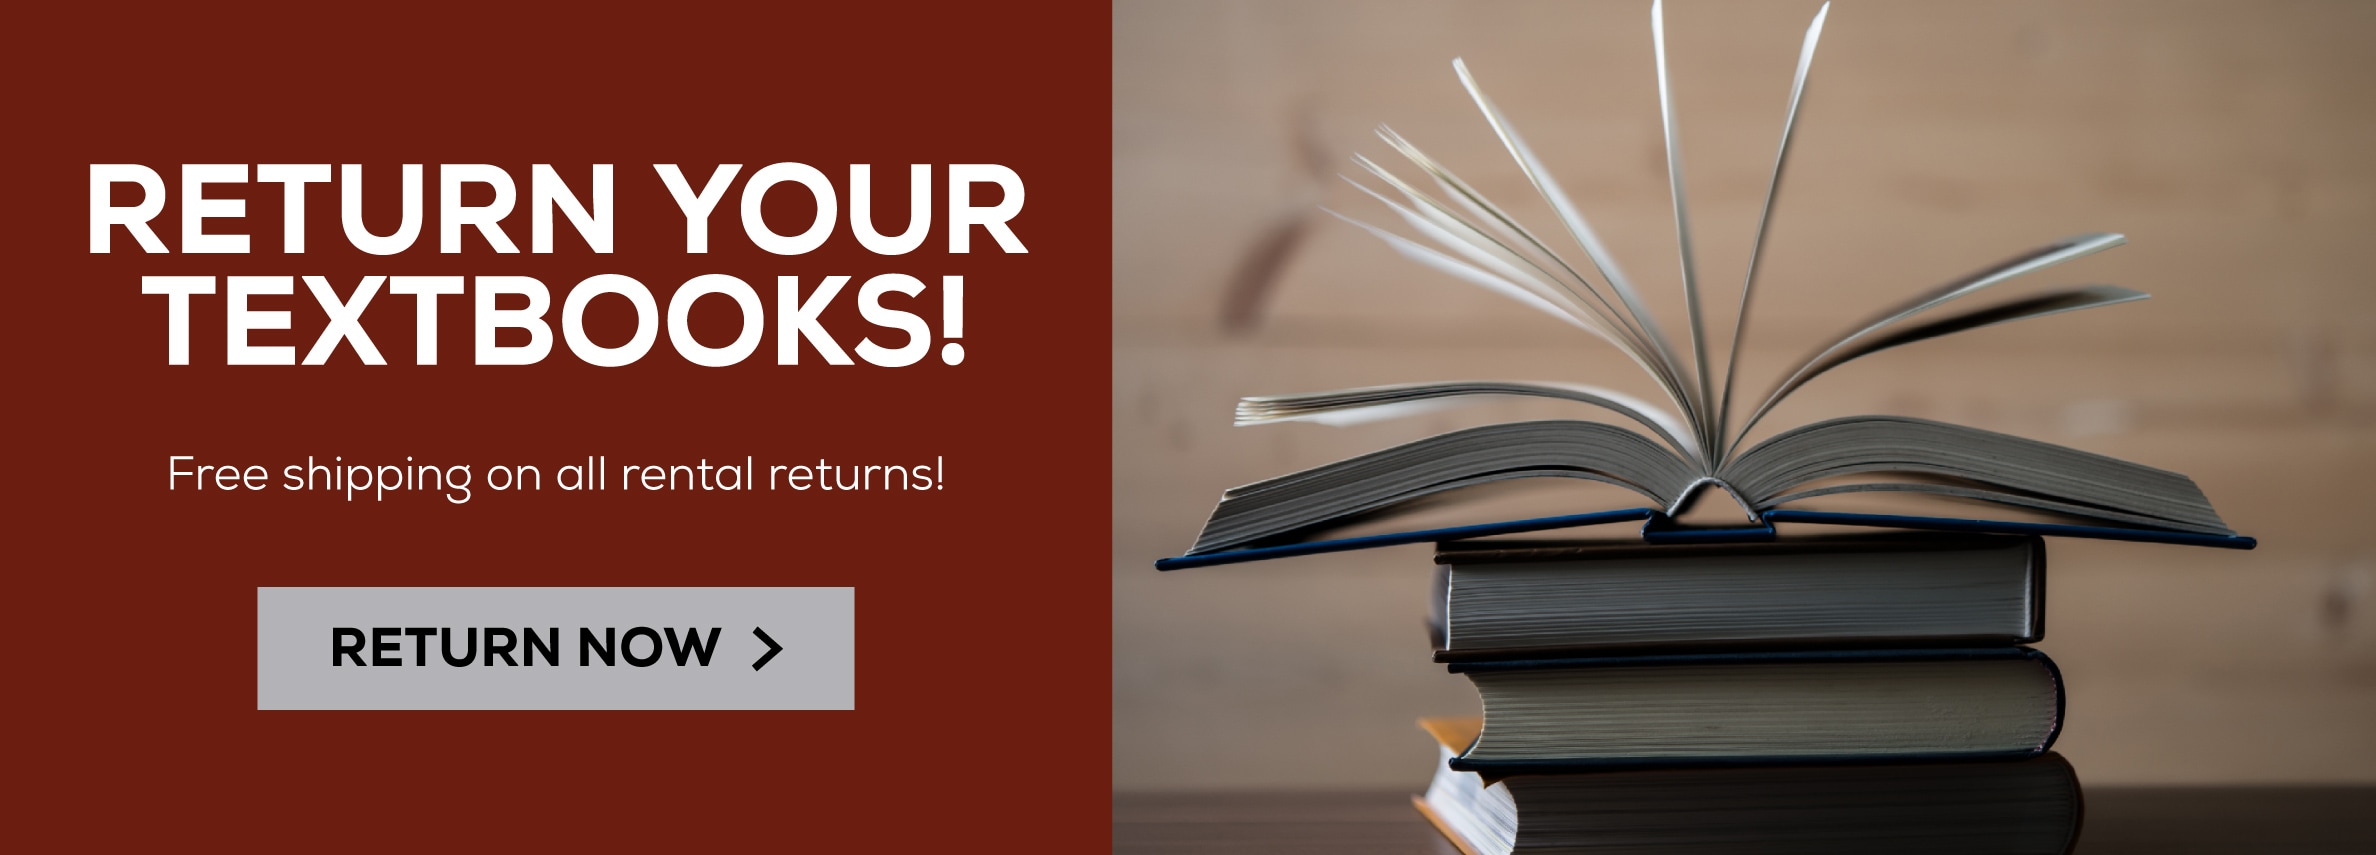 Return Your Textbooks, Free shipping on all rental returns!